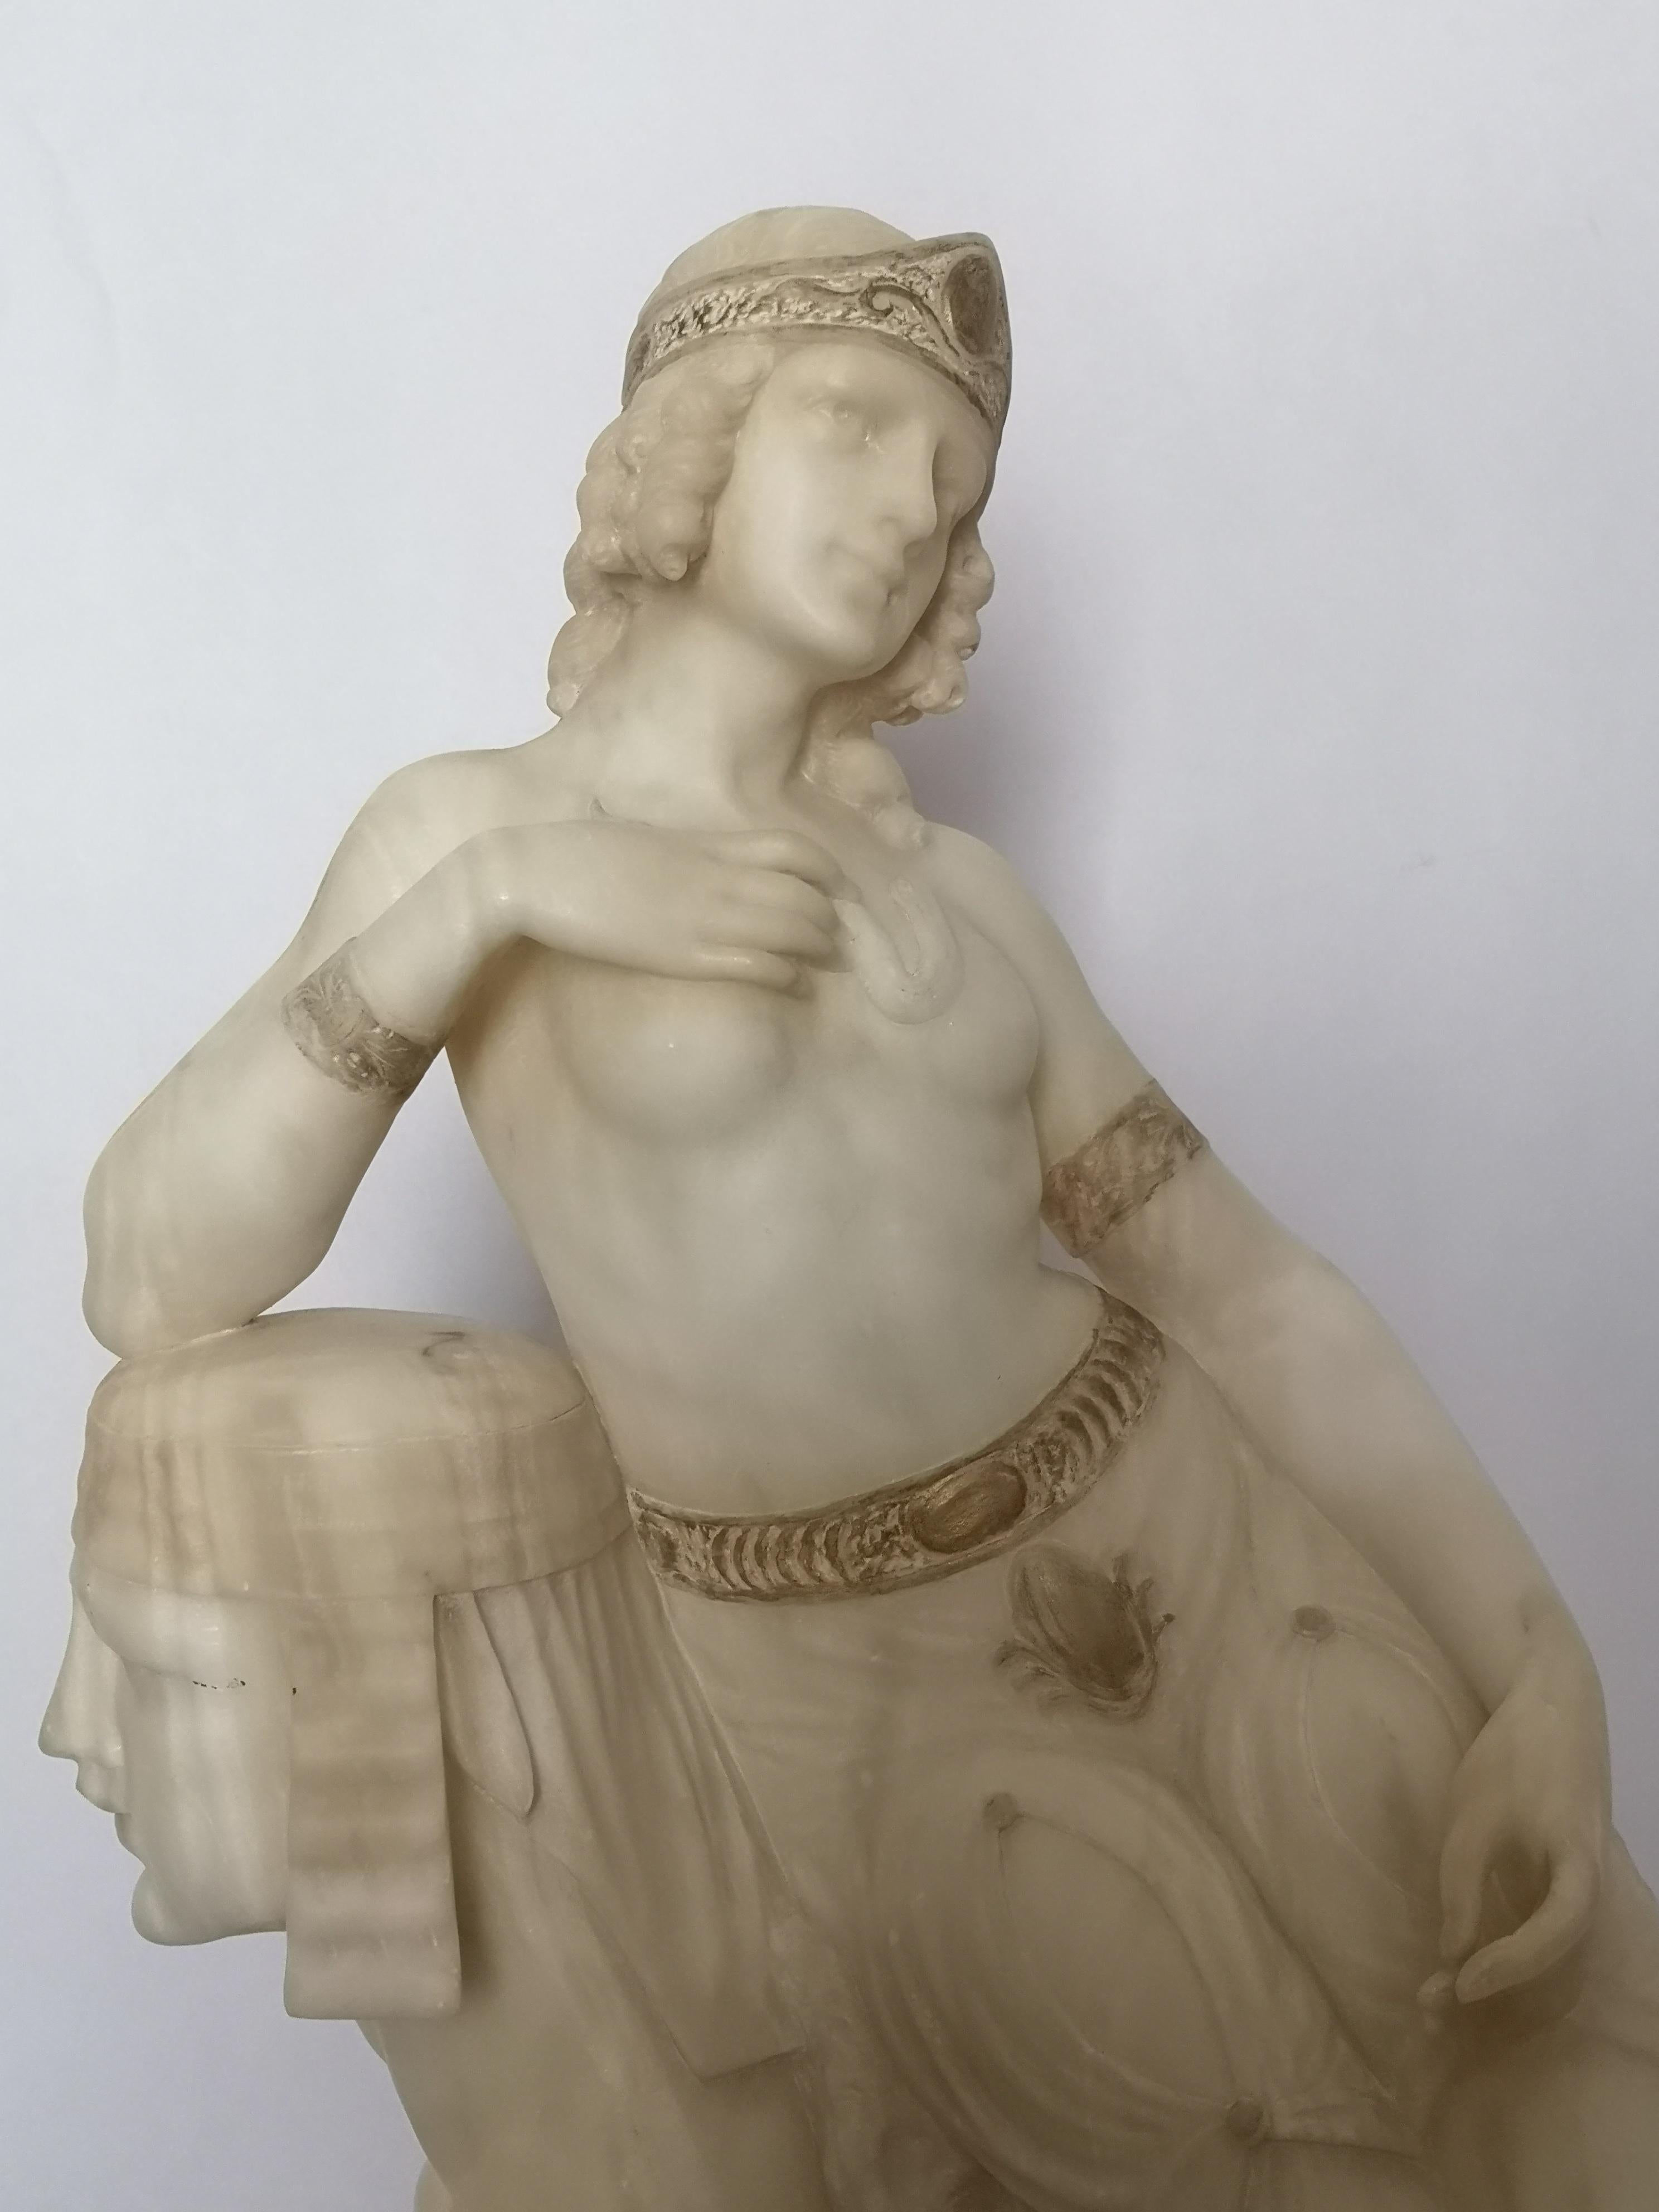 A very stylish Italian Art Deco sculpture, of Egyptian influence. The seated lady with gilt highlighted headpiece and waistband, with a lion skin rug draped over the sphinx. Signed to the back 'F Masini Florence'.
Italian, circa 1920.